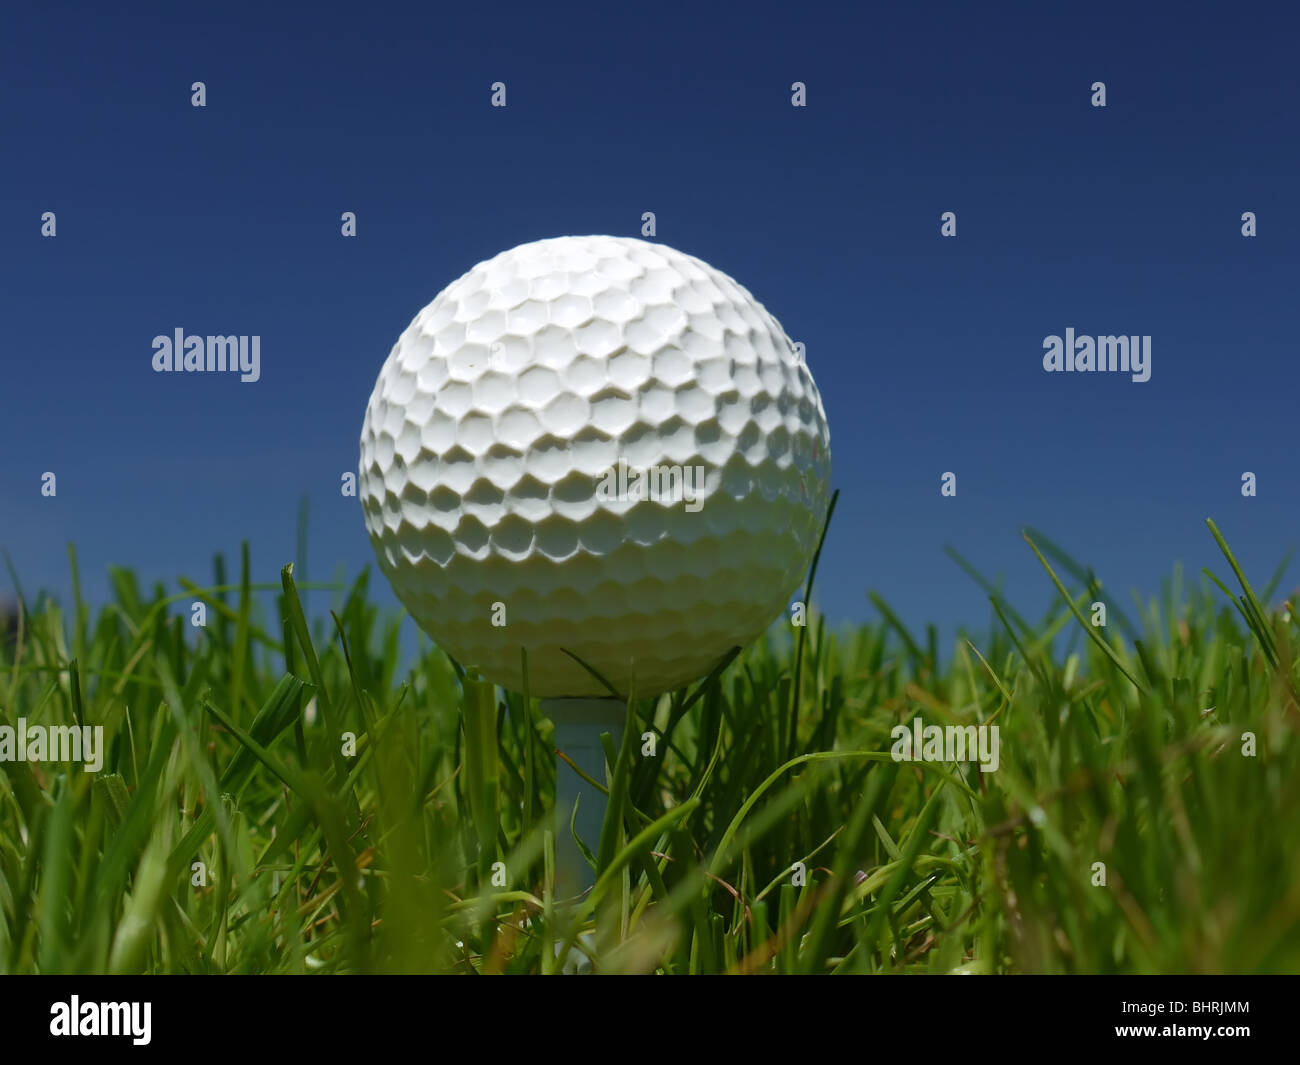 Golf ball on tee in the grass over blue sky Stock Photo